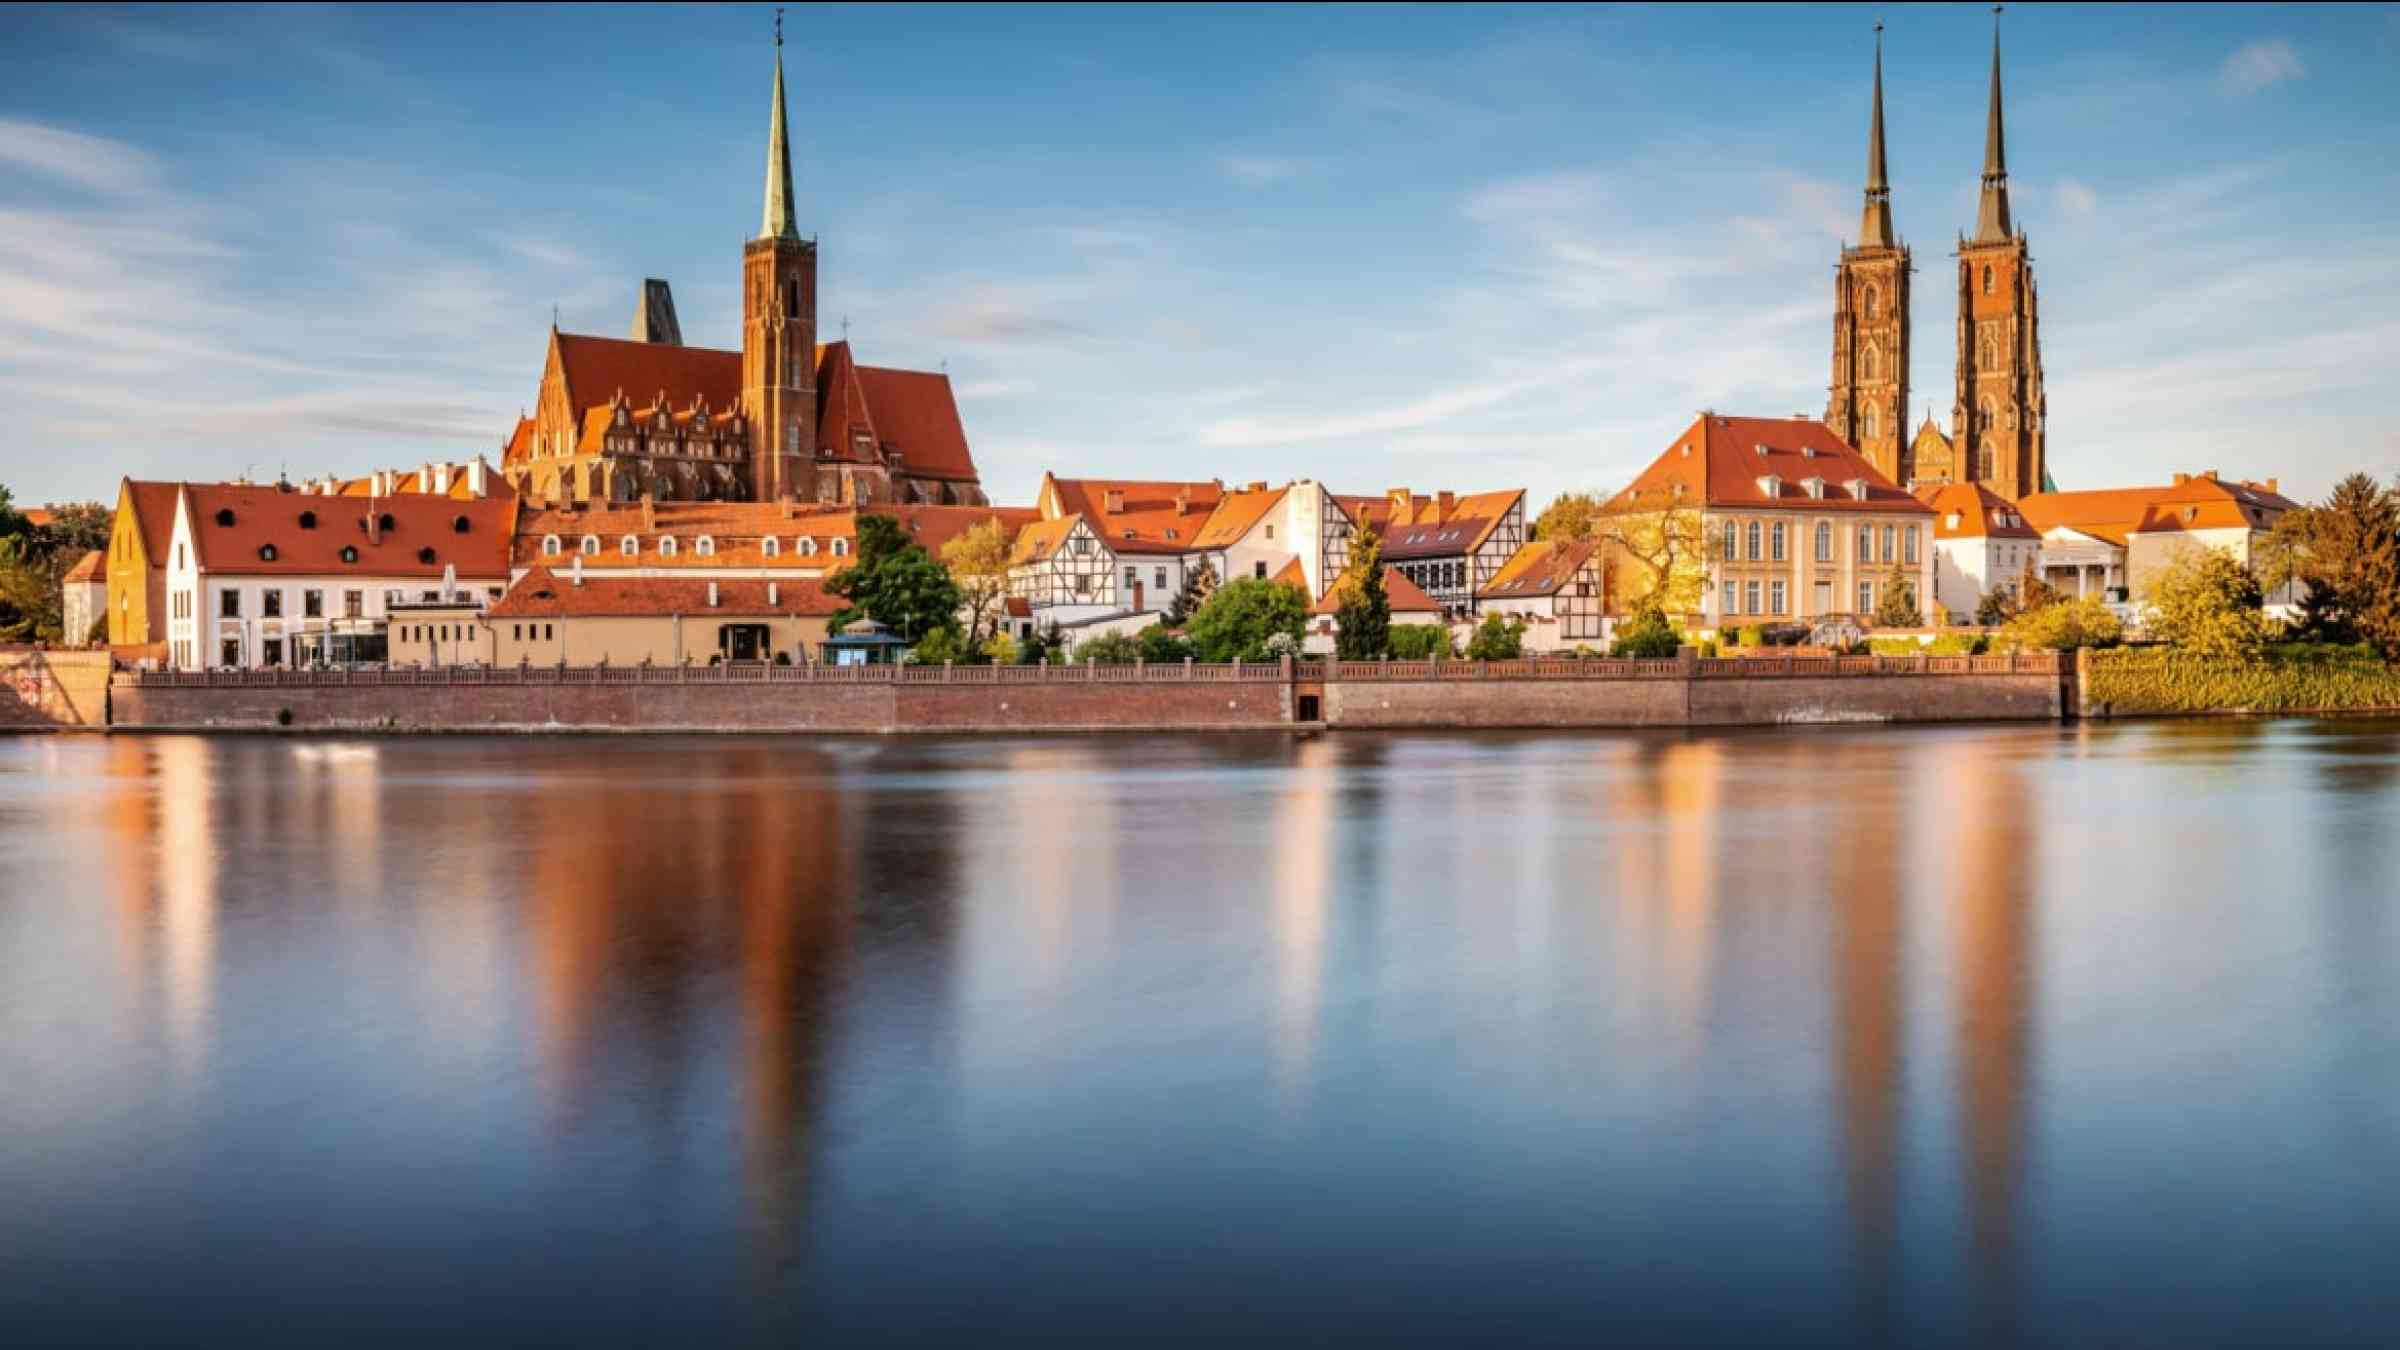 Image of Wroclaw in Poland.